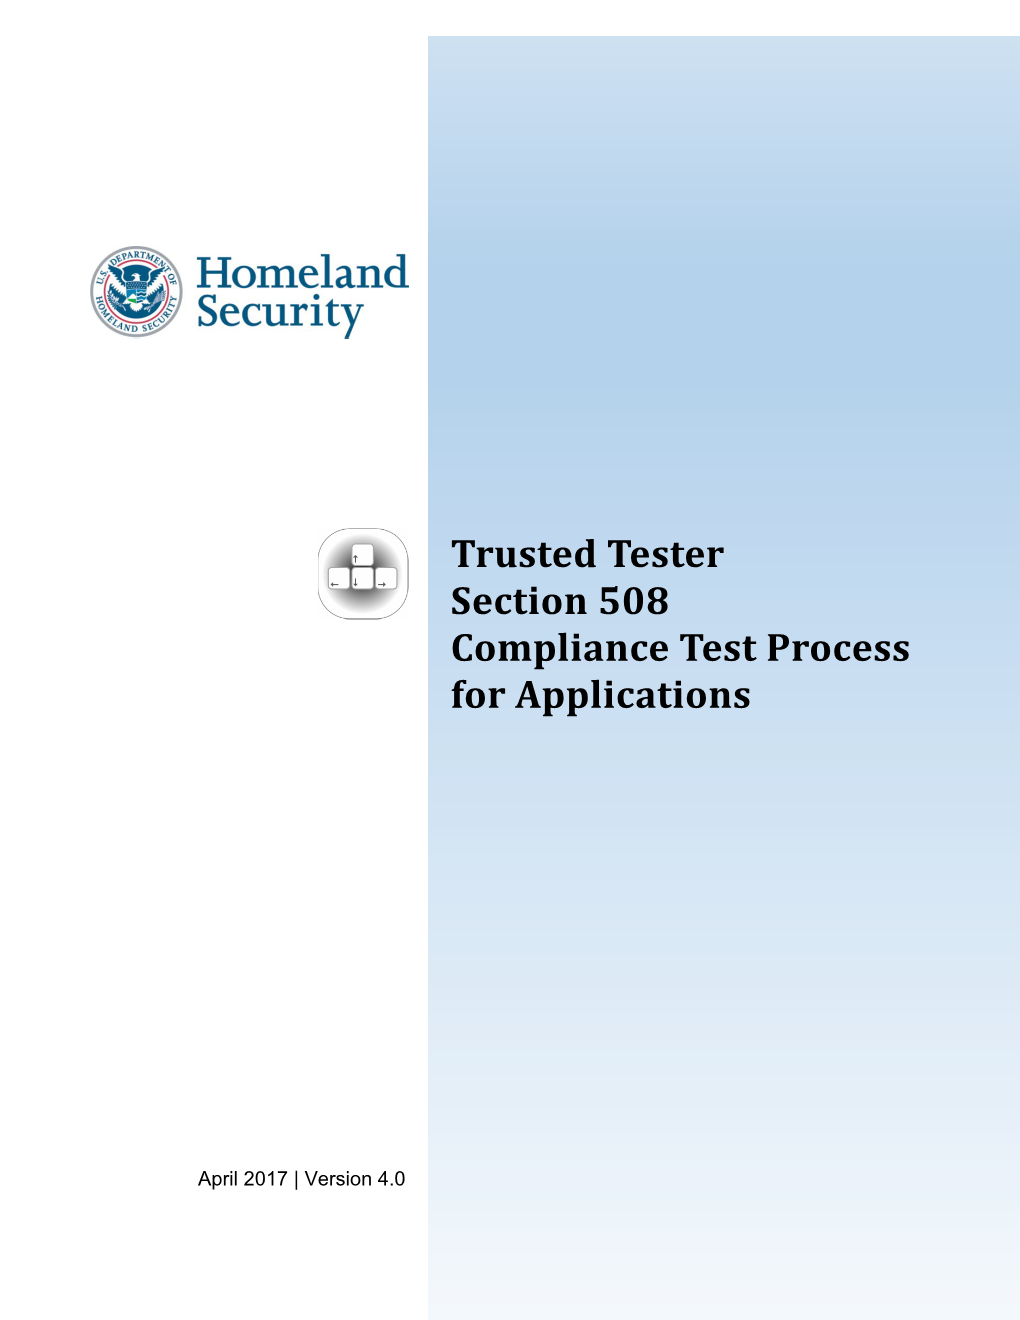 DHS Section 508 Compliance Test Process for Applications